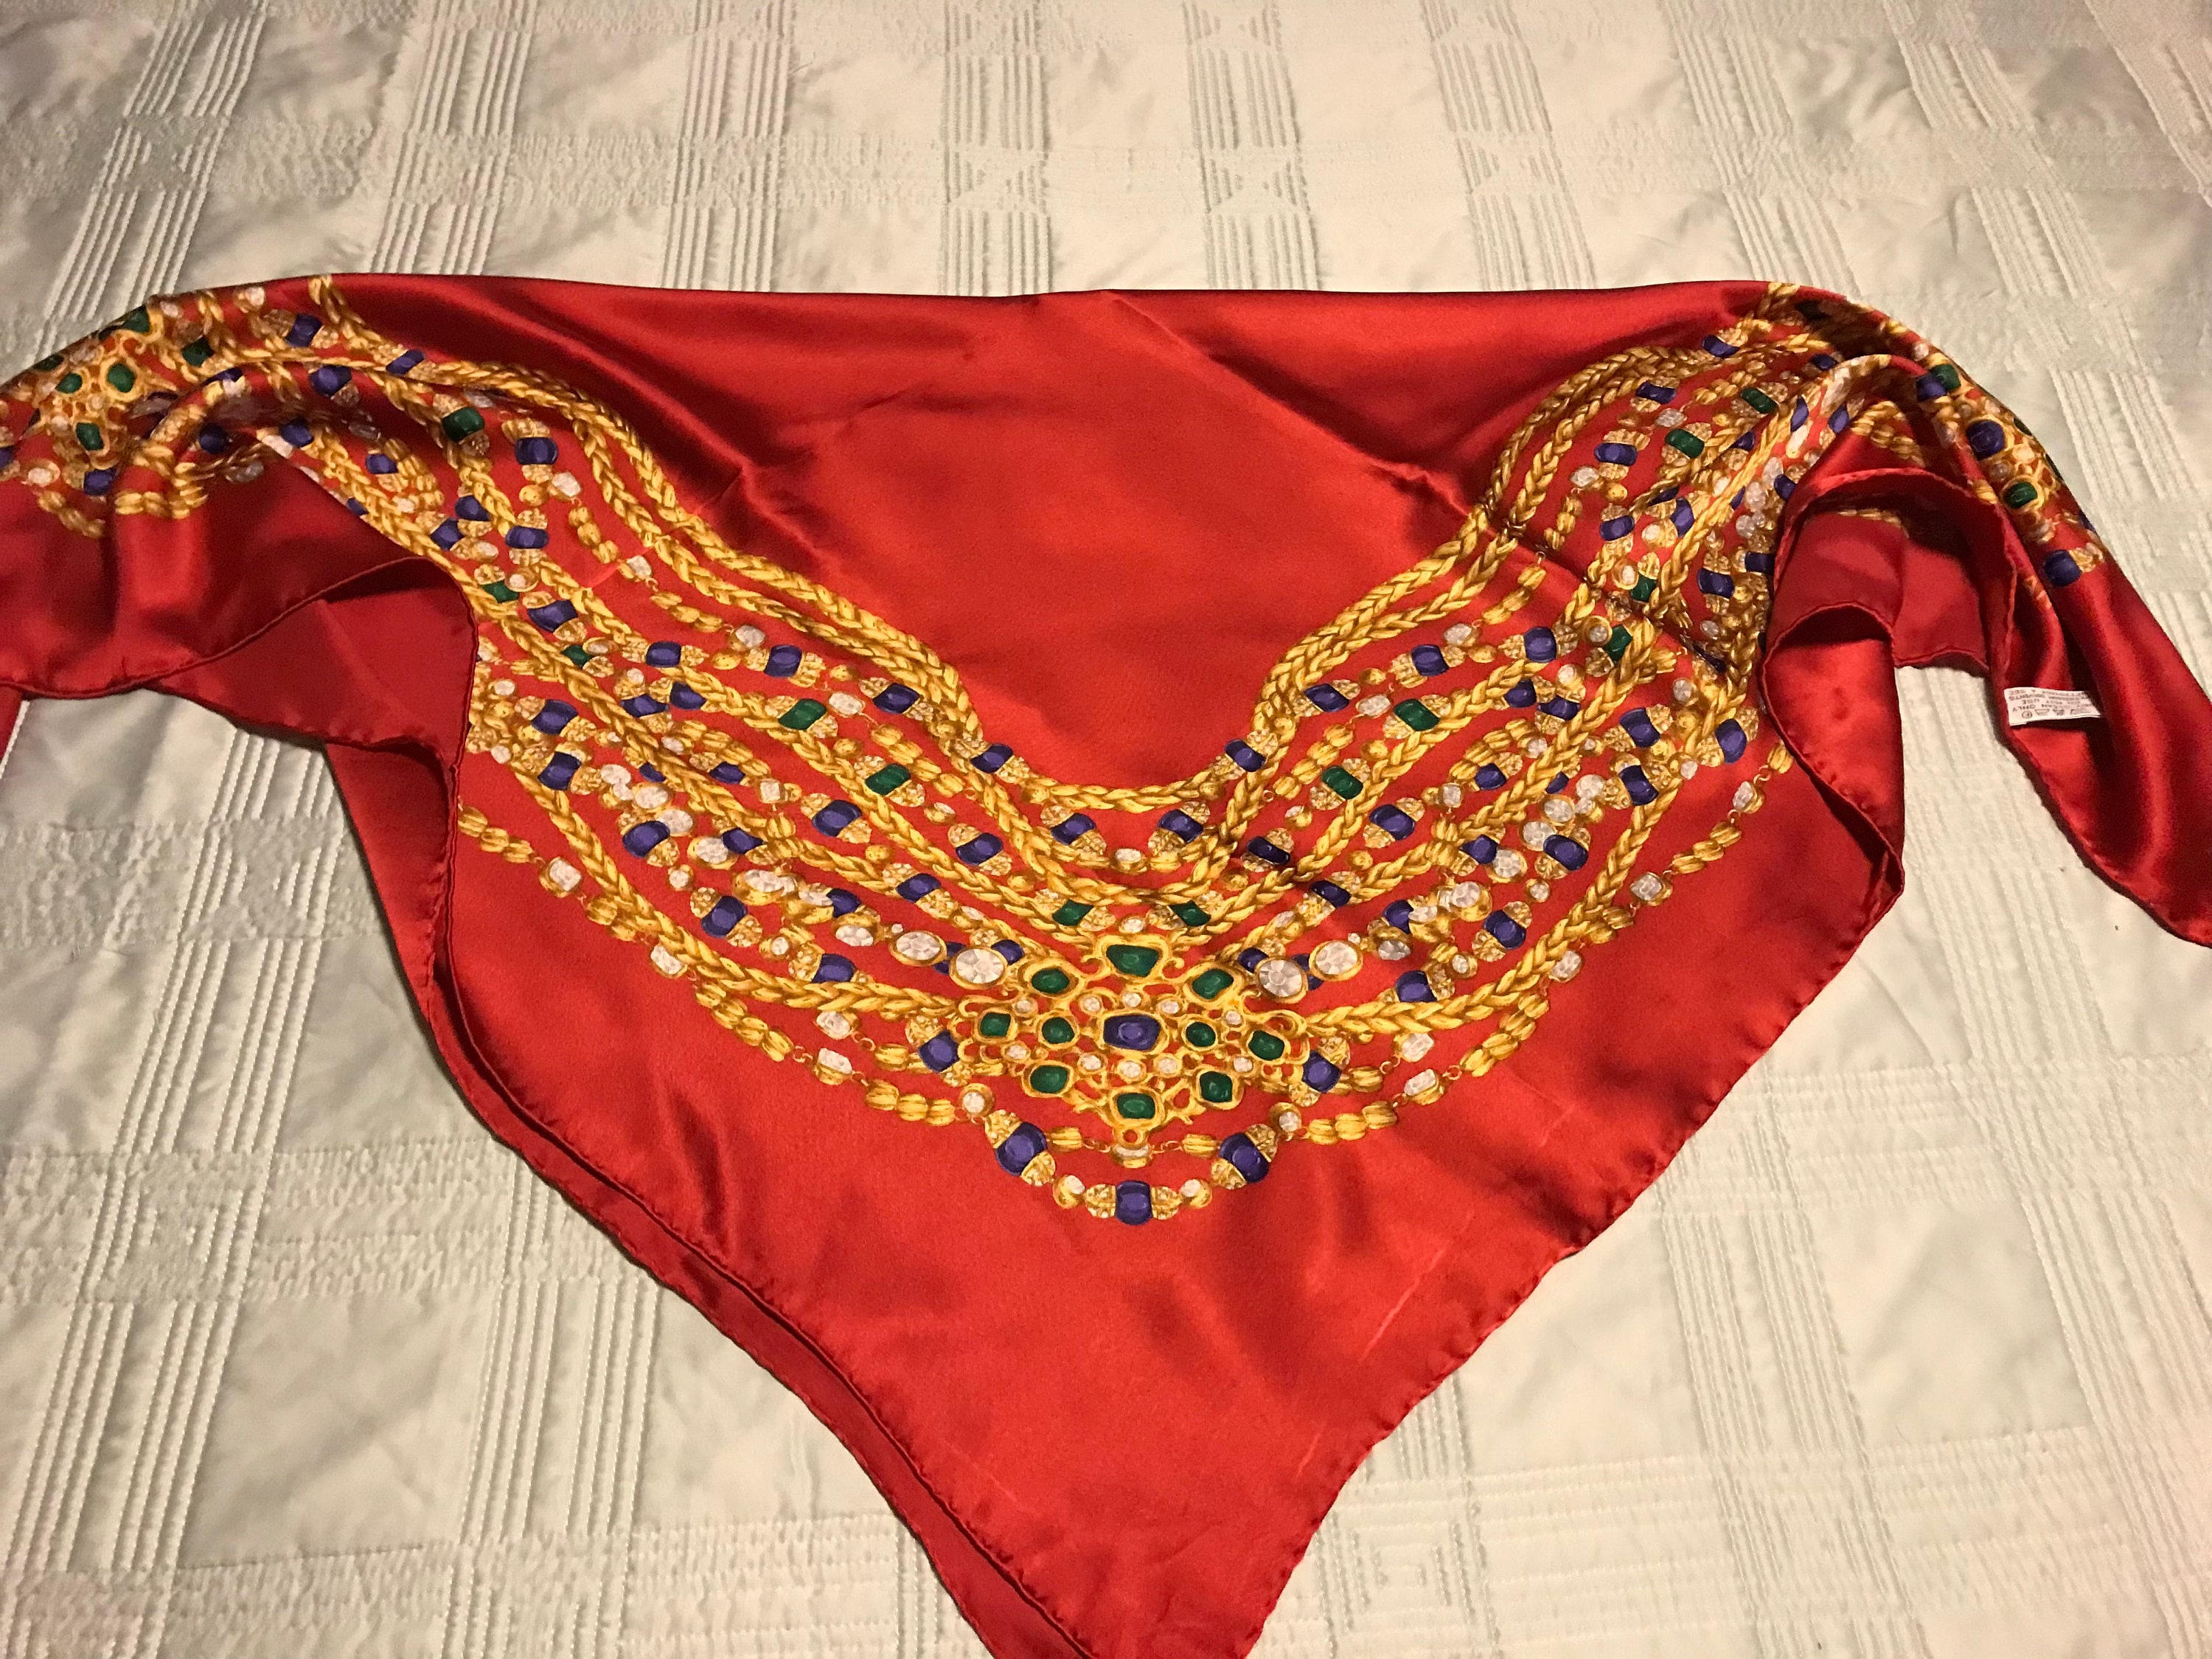 Chanel Silk Scarf Signed Red W/ Gold Chains Jewel Tone 